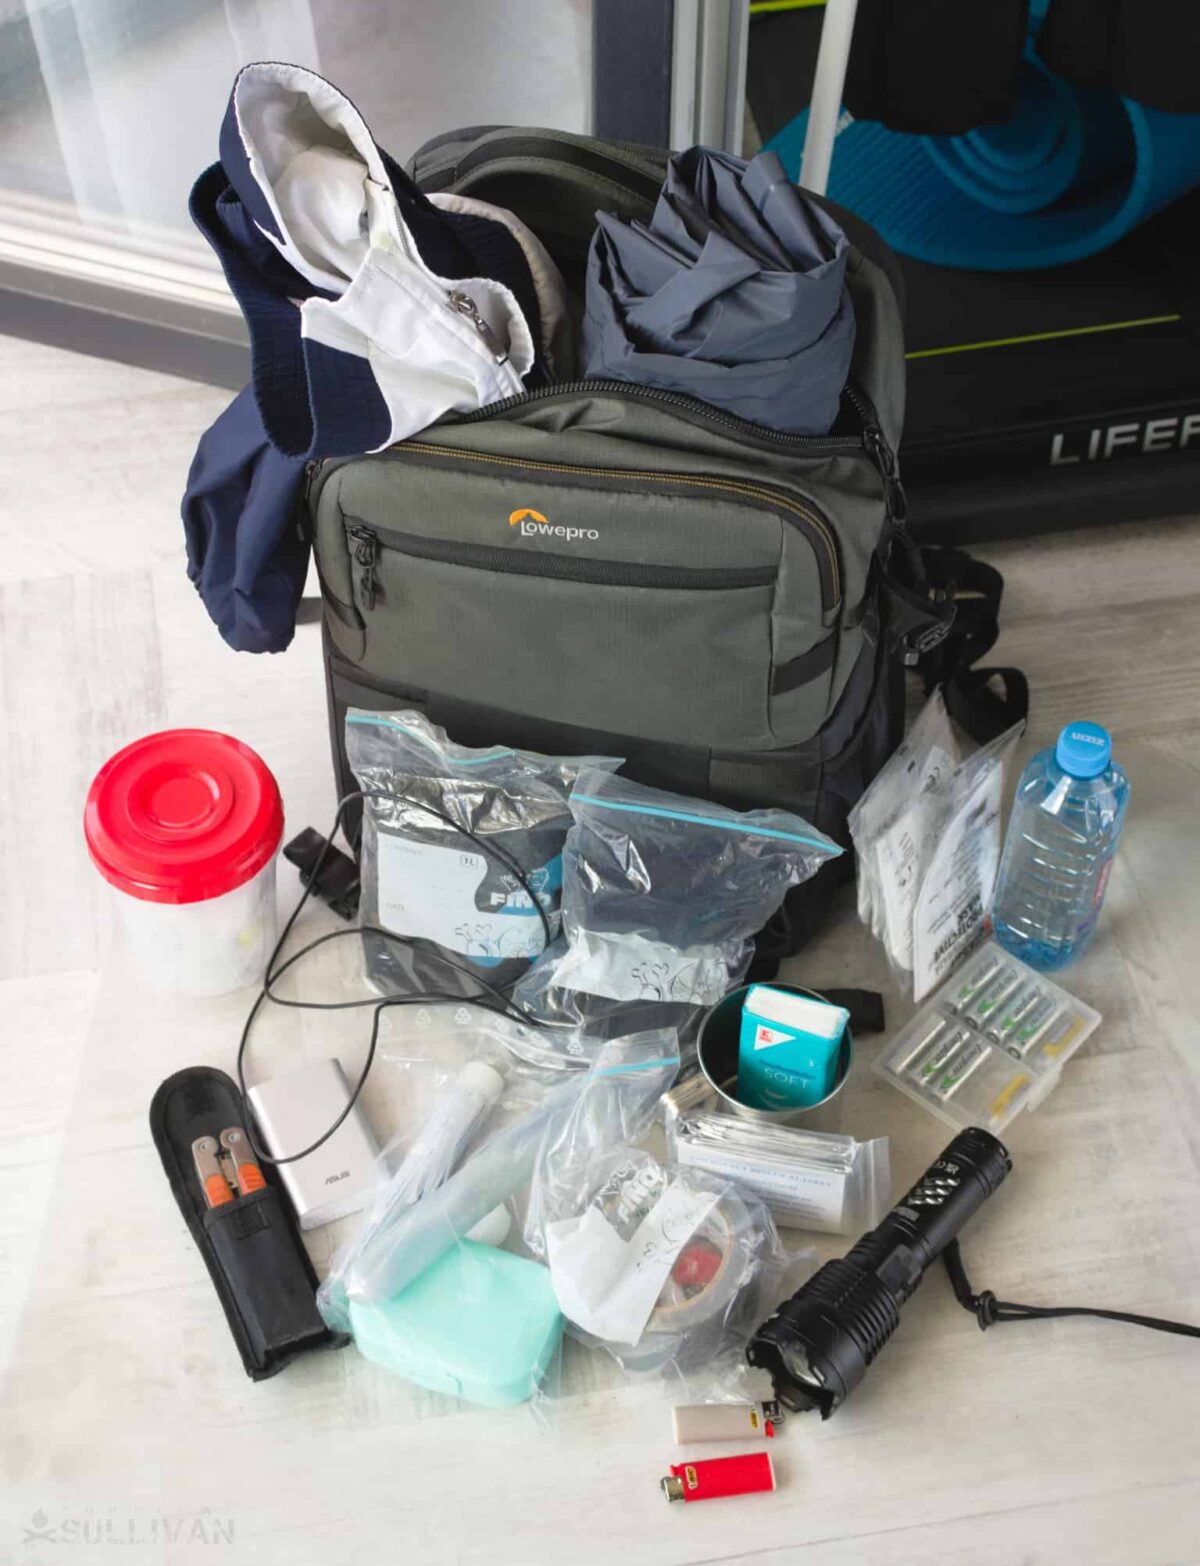 The Absolute Top 20 Items for Your Emergency Kit